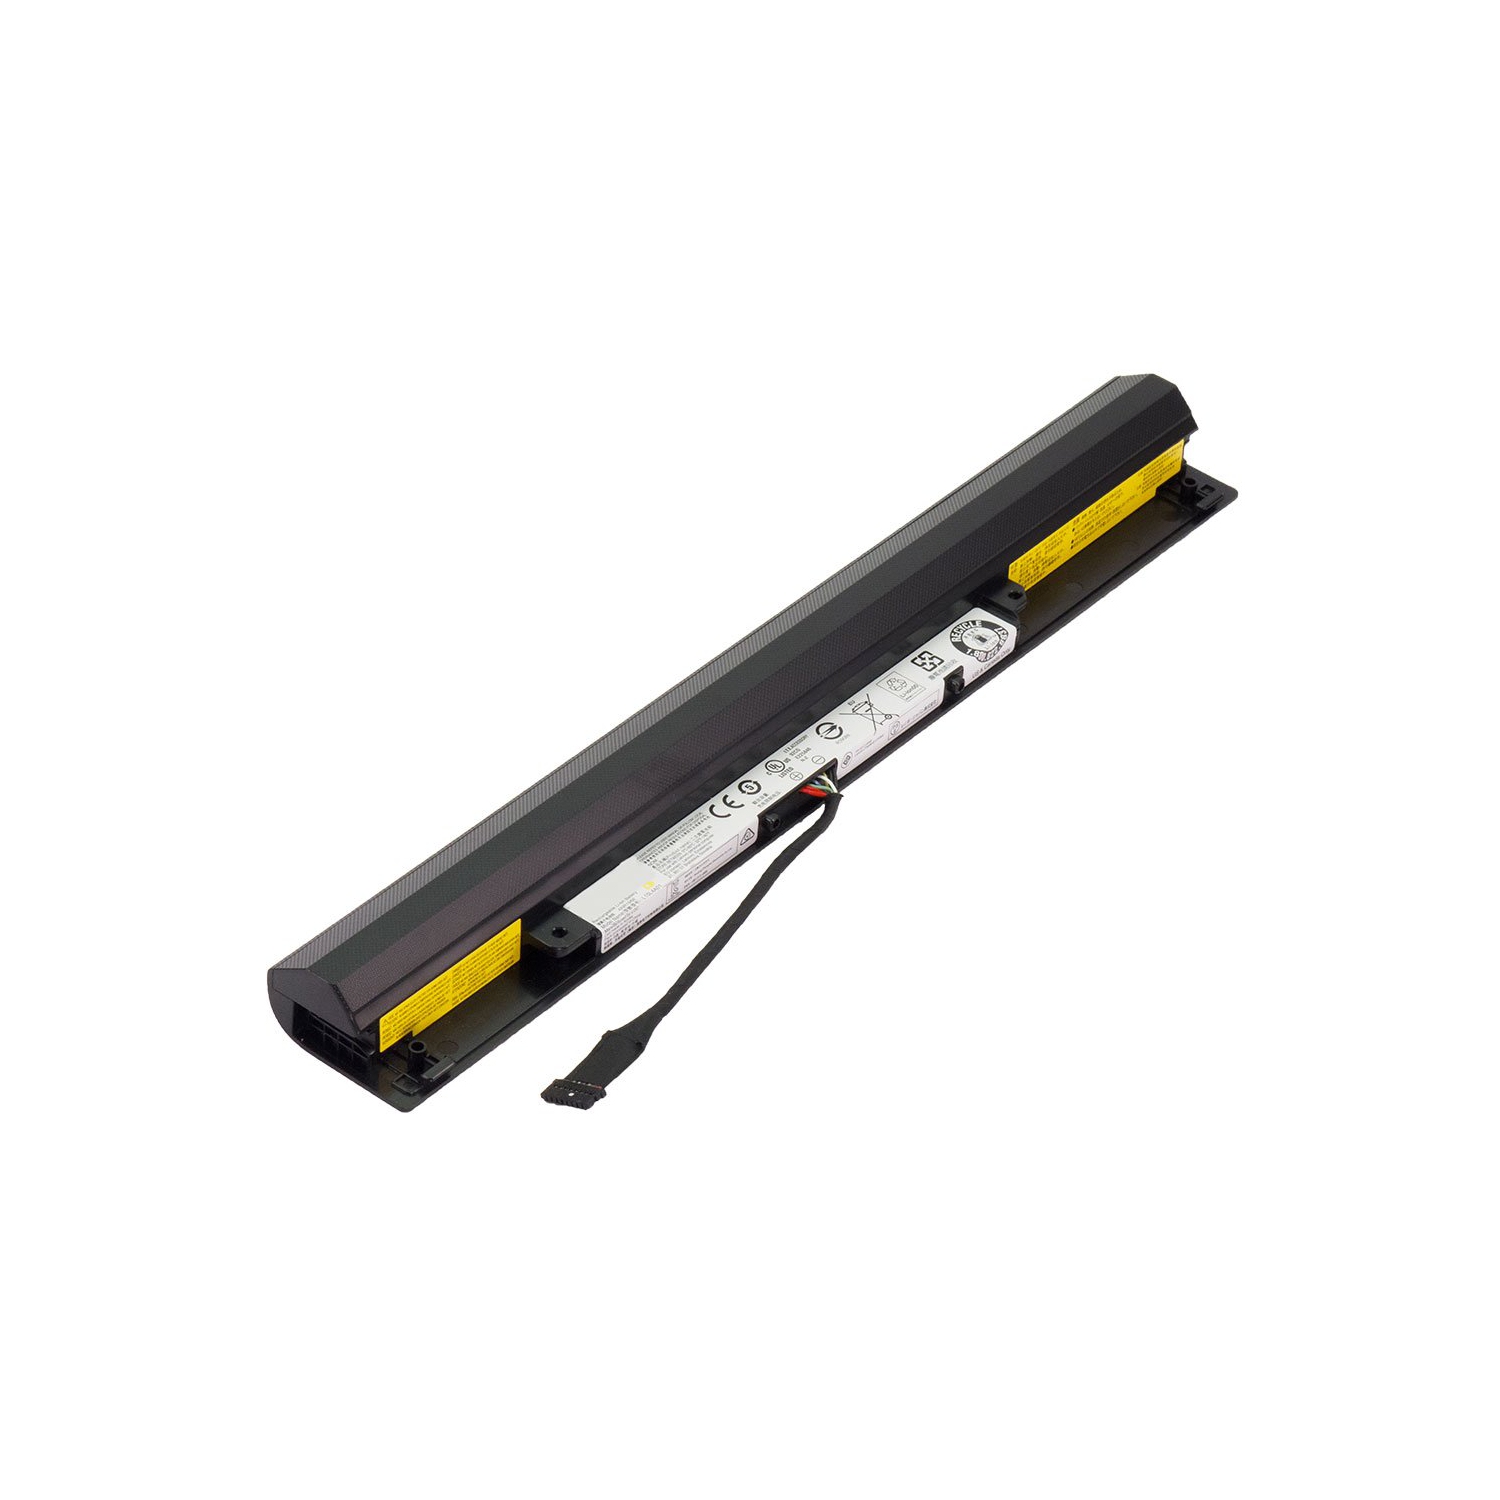 Laptop Battery Replacement for Lenovo IdeaPad 100-15IBD 80QQ00KBGE, 41NR19/65, L15L4A01